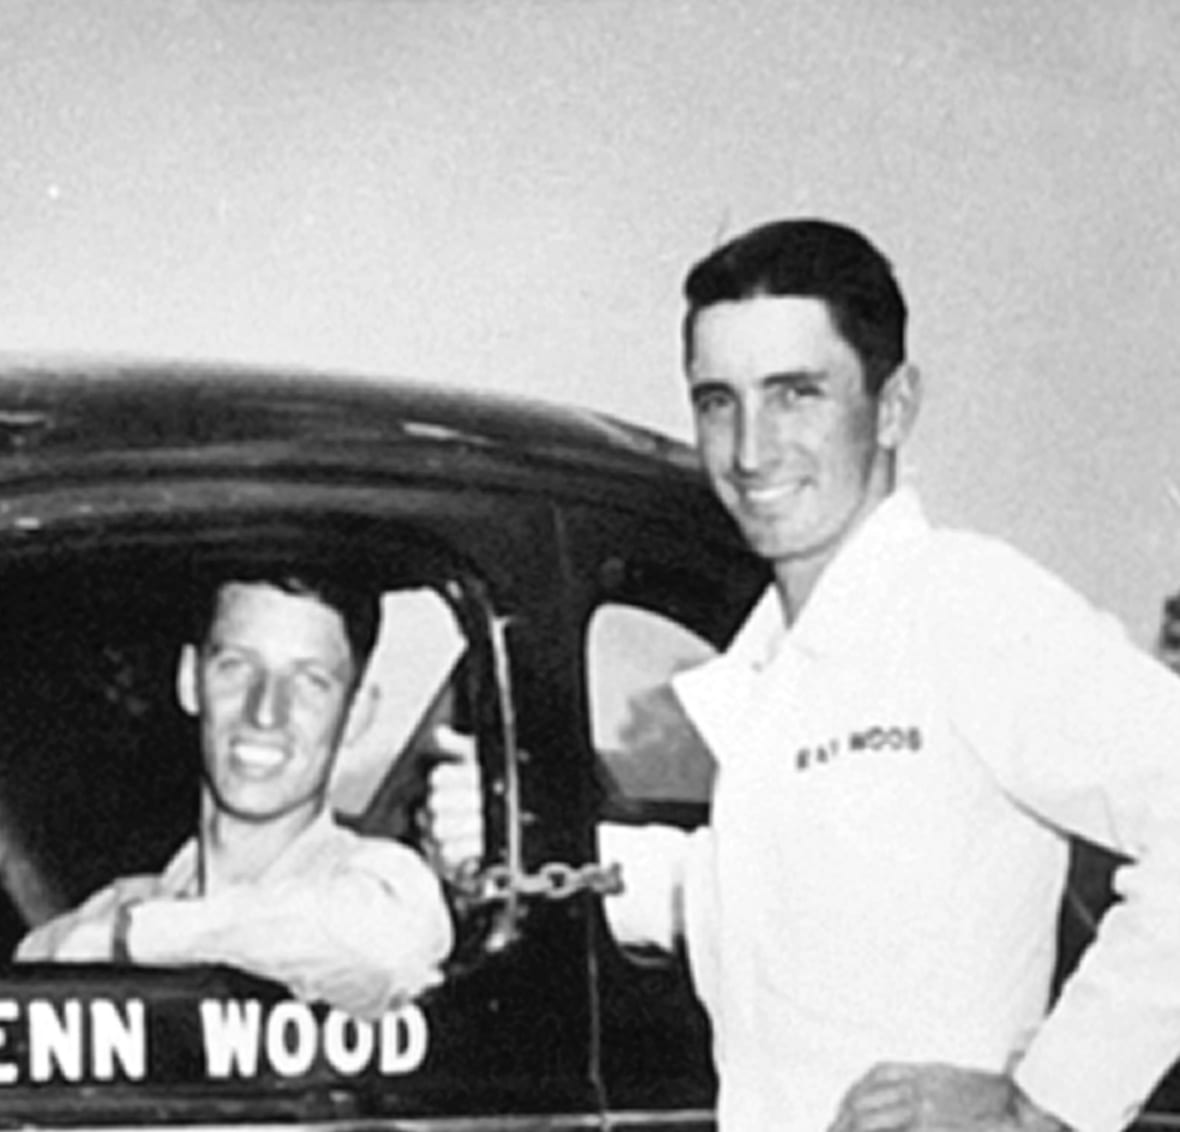 Glenn Wood (left) with his brother Ray Lee Wood, who died on May 5 at the age of 92. (Wood Brothers Racing Photo)